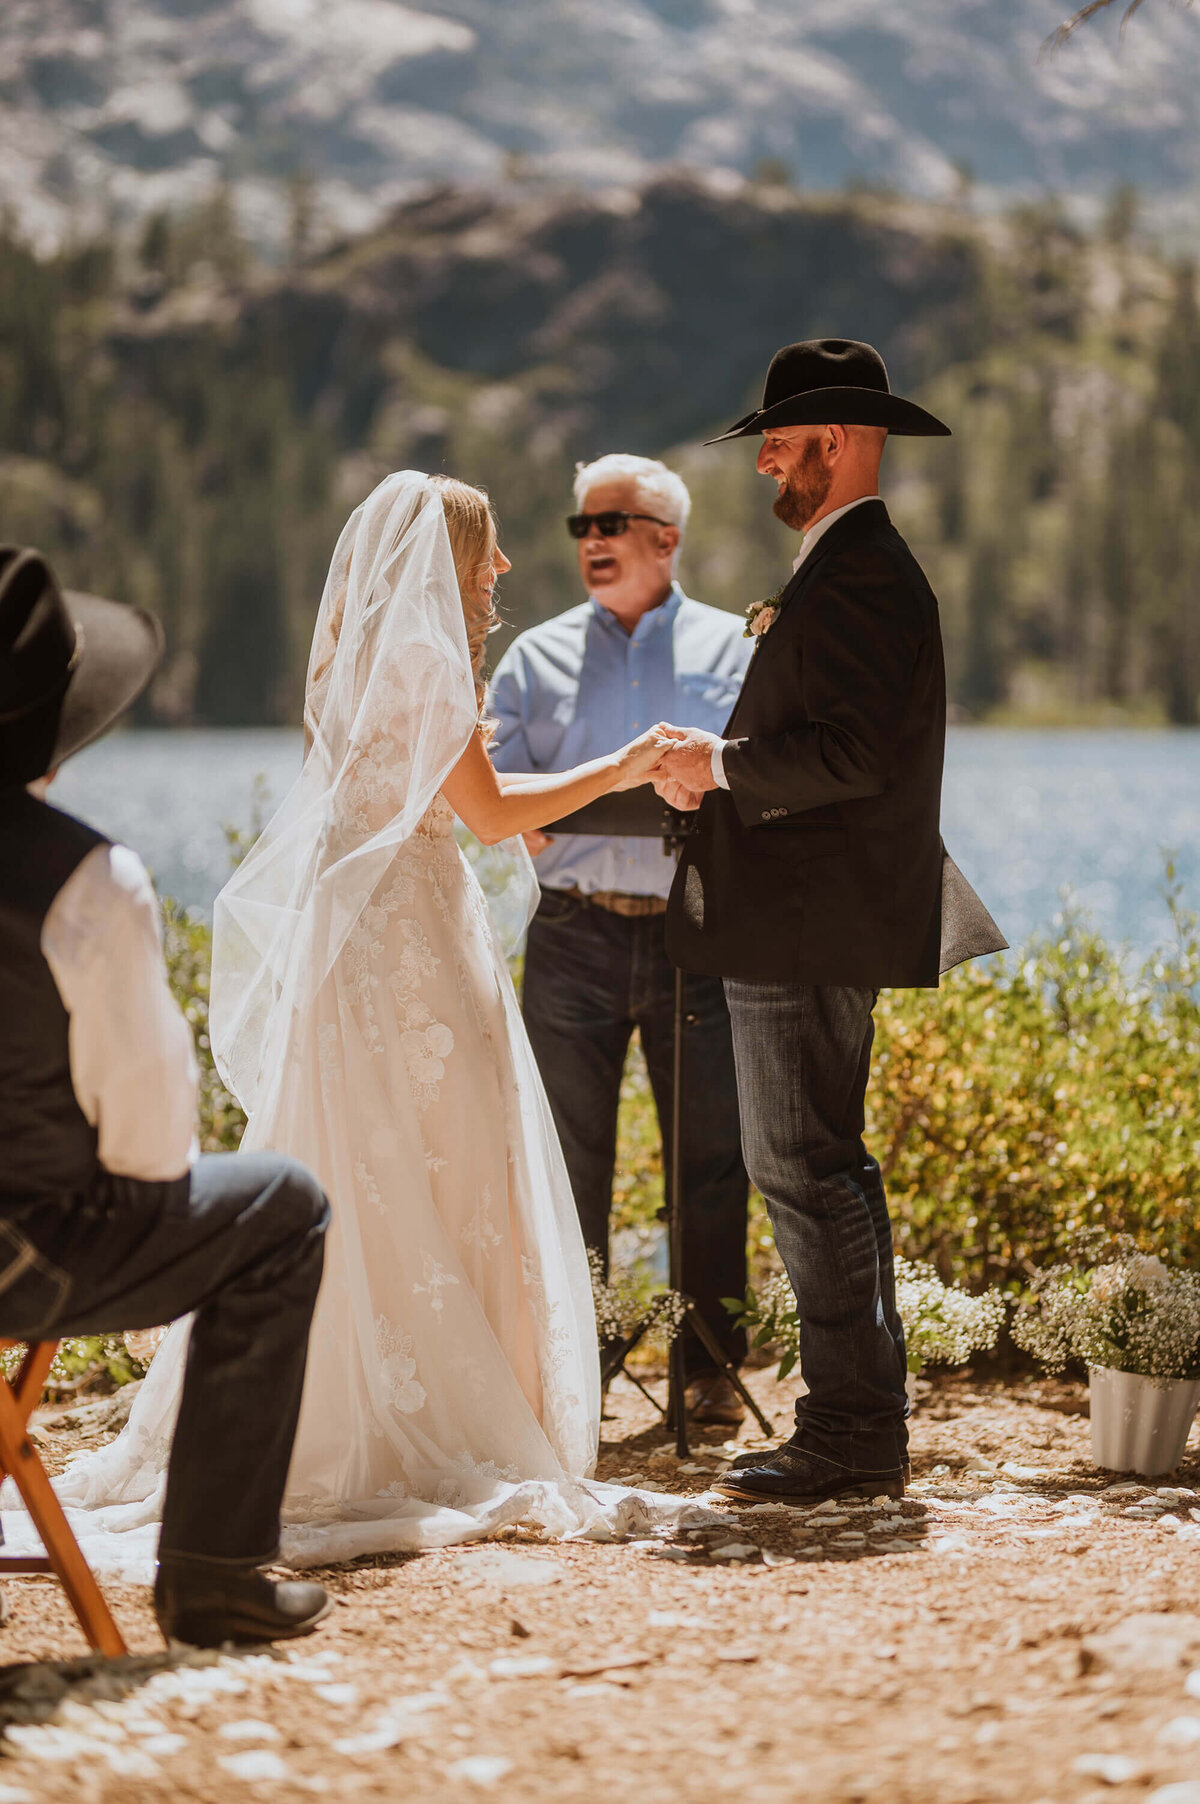 A wedding ceremony at Sardine Lake in Tahoe.